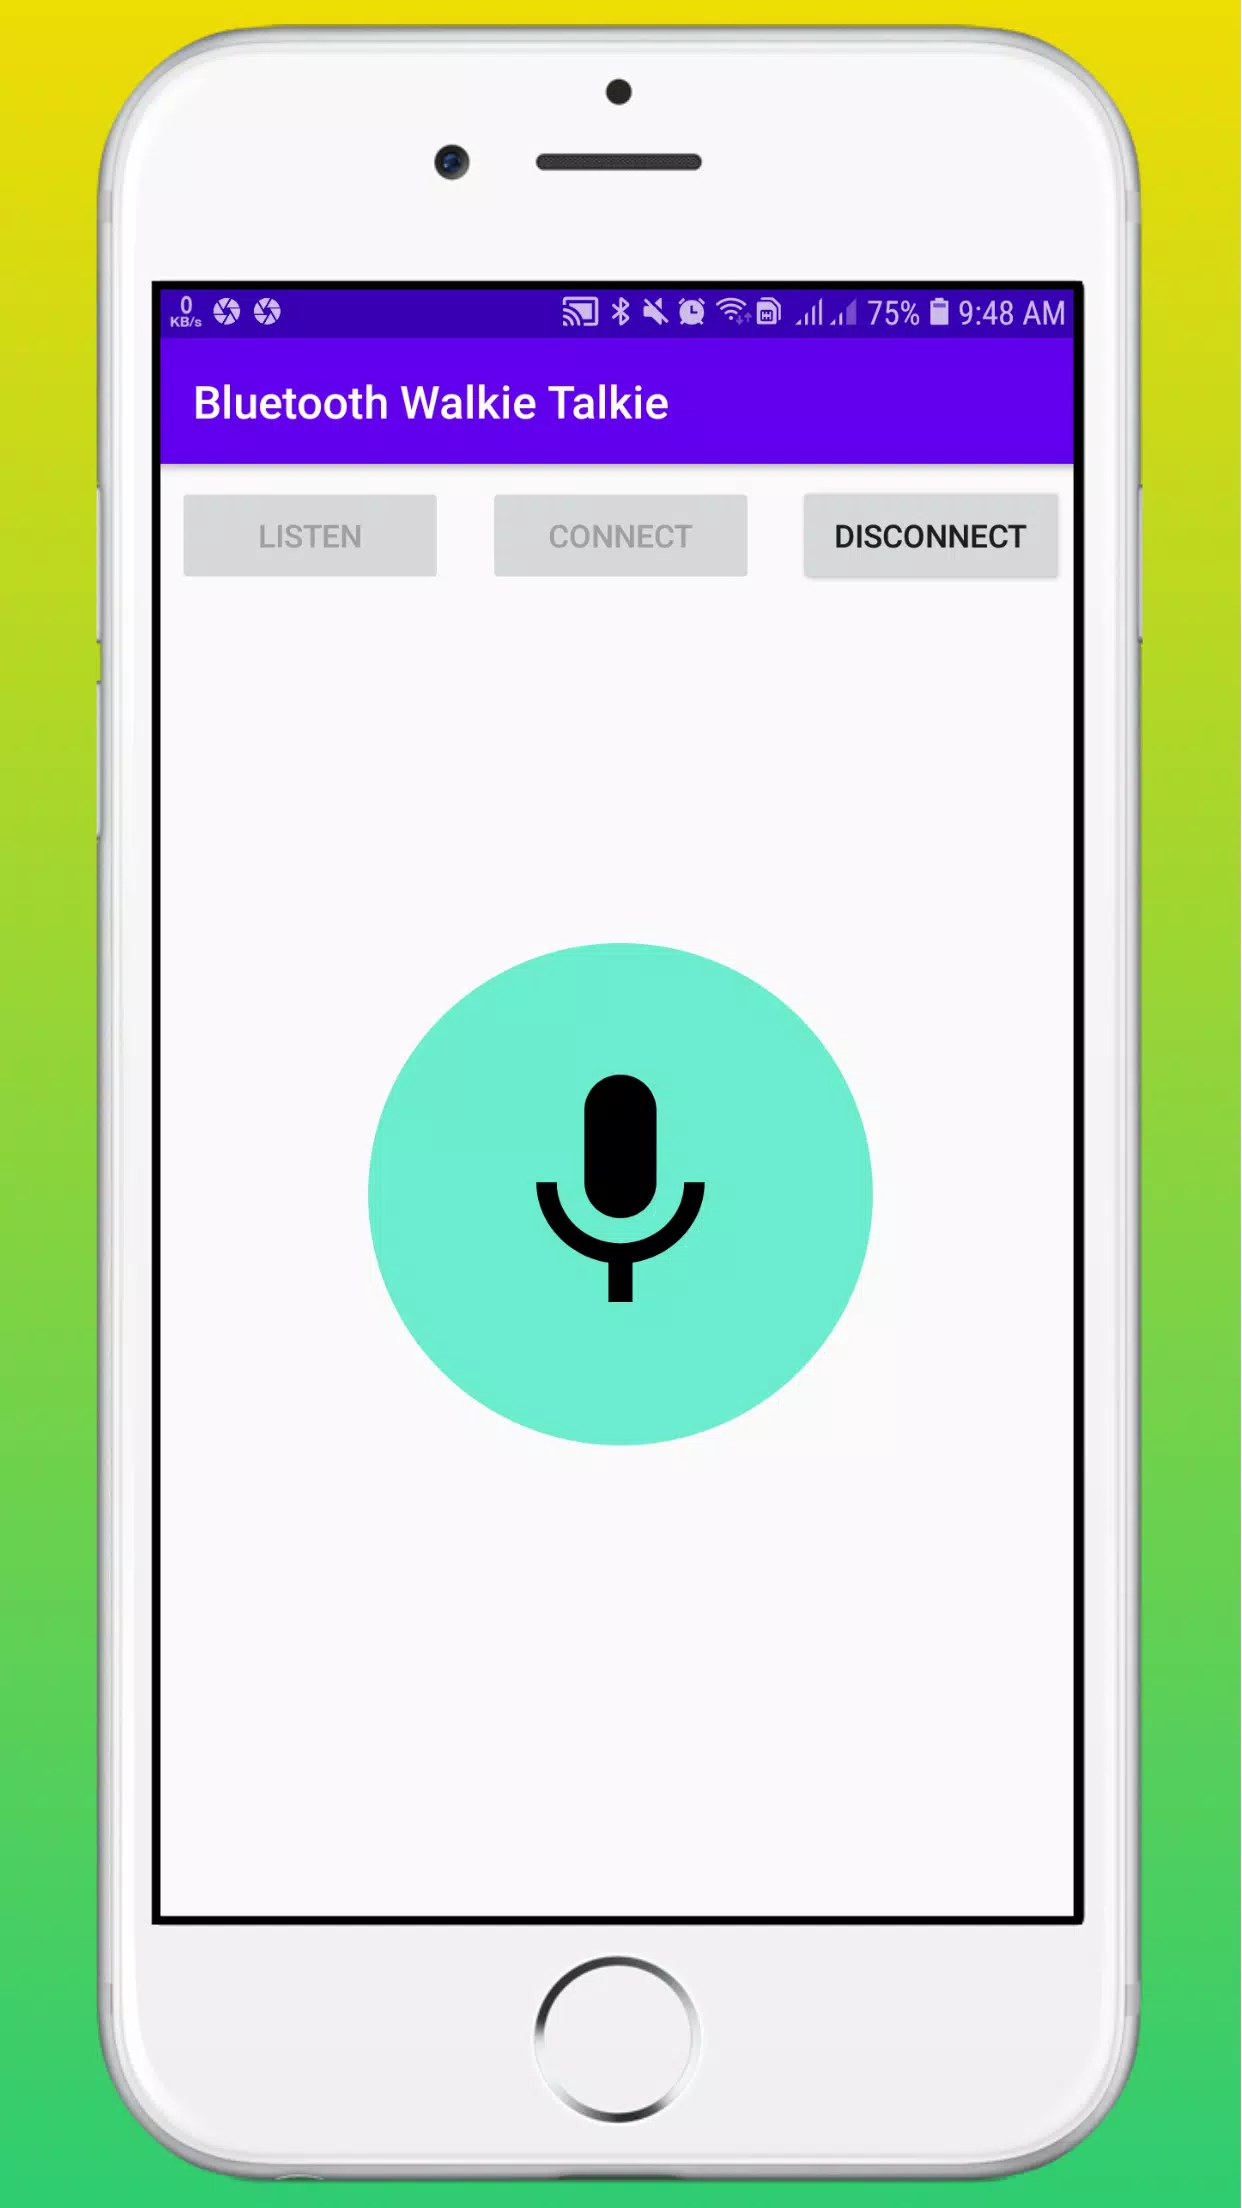 Bluetooth Walkie Talkie for Android - APK Download